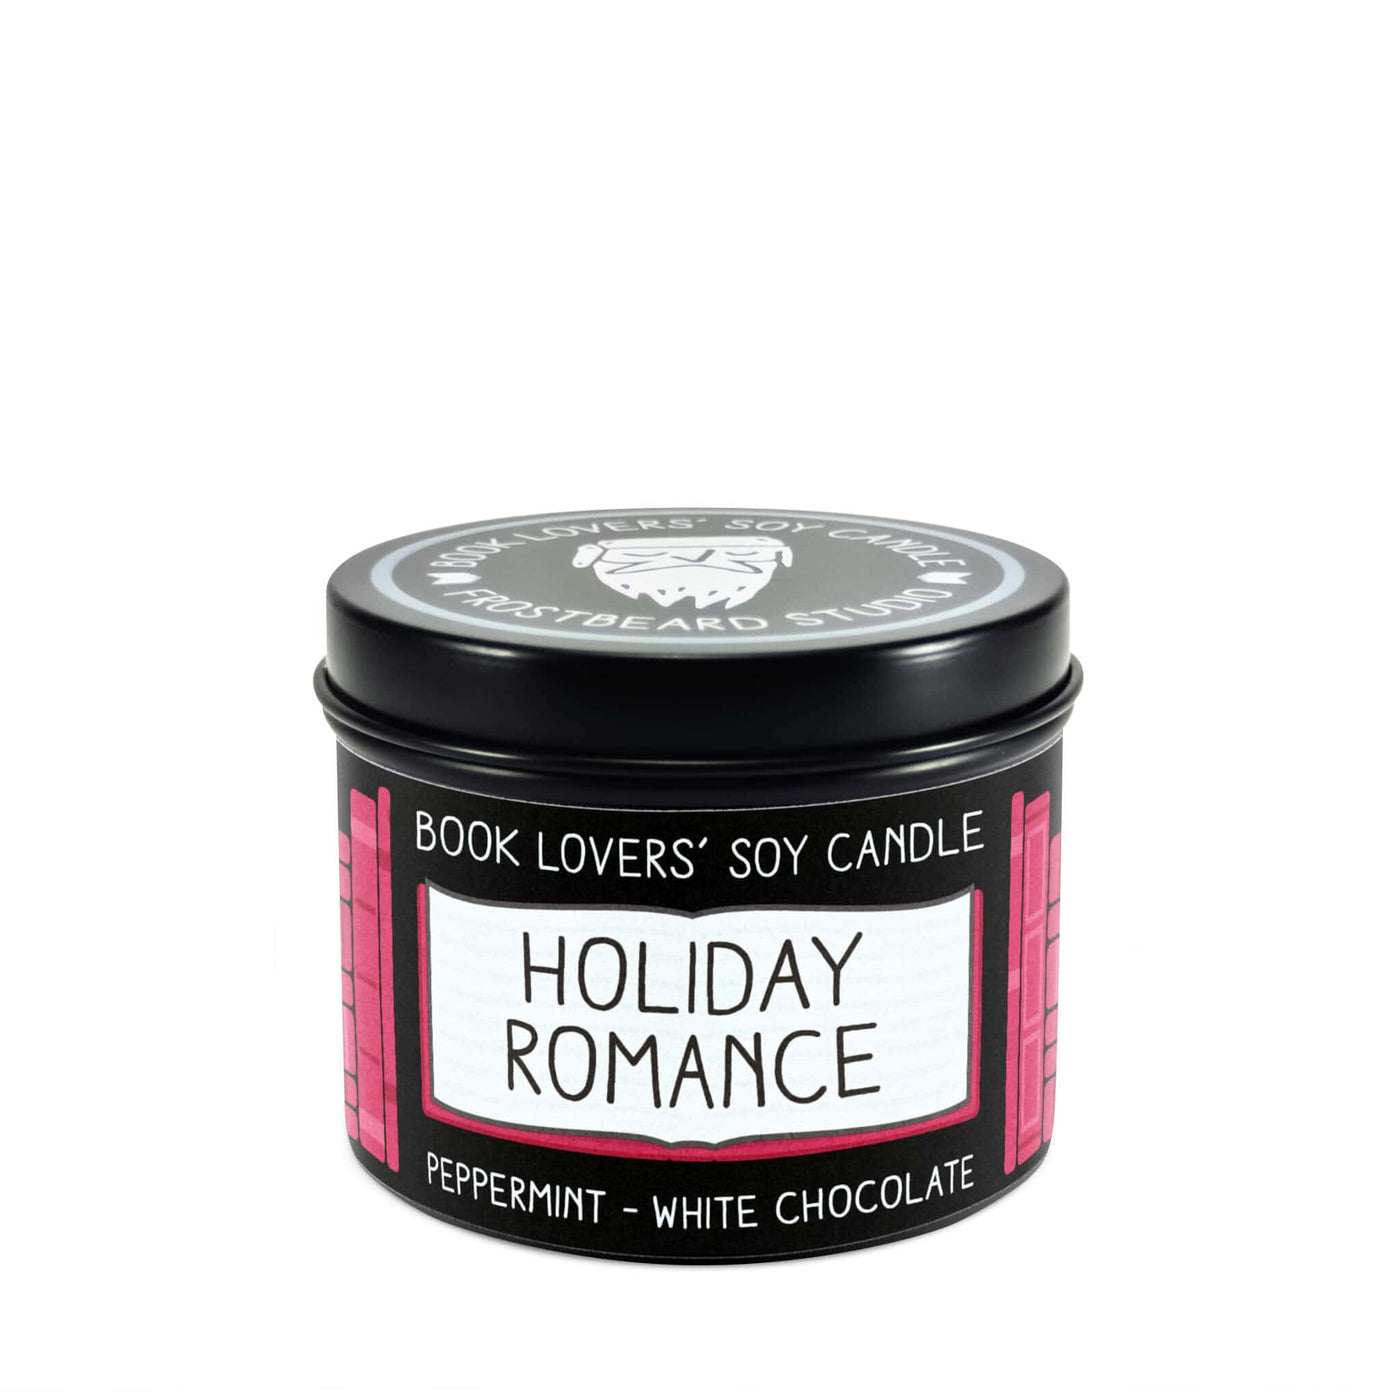 Holiday Romance  -  4 oz Tin  -  Book Lovers' Soy Candle  -  Frostbeard Studio